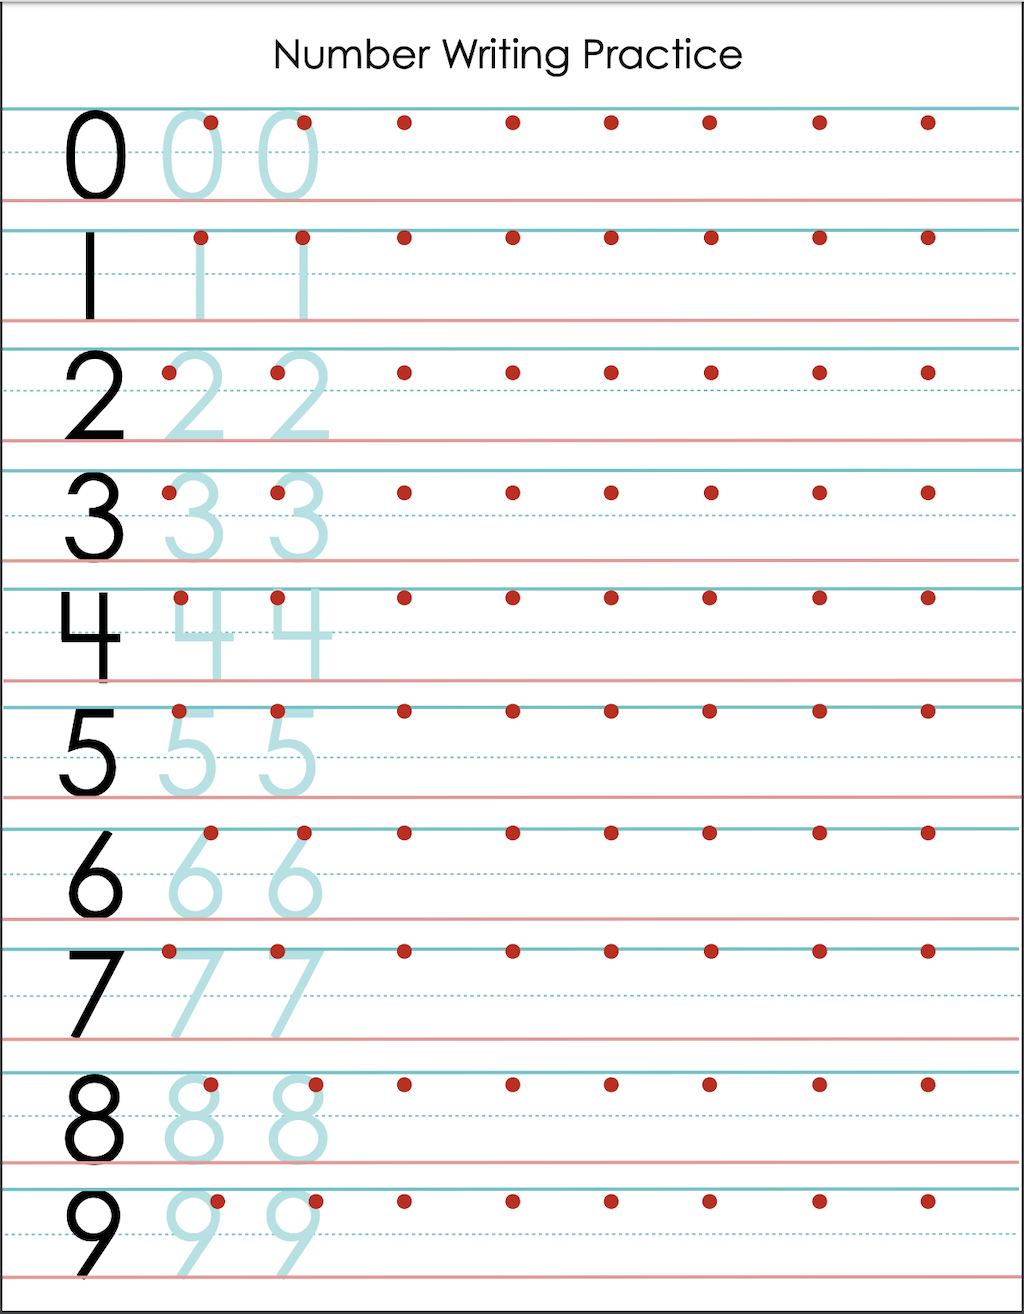 Number Writing Practice Sheet Free Printable From 